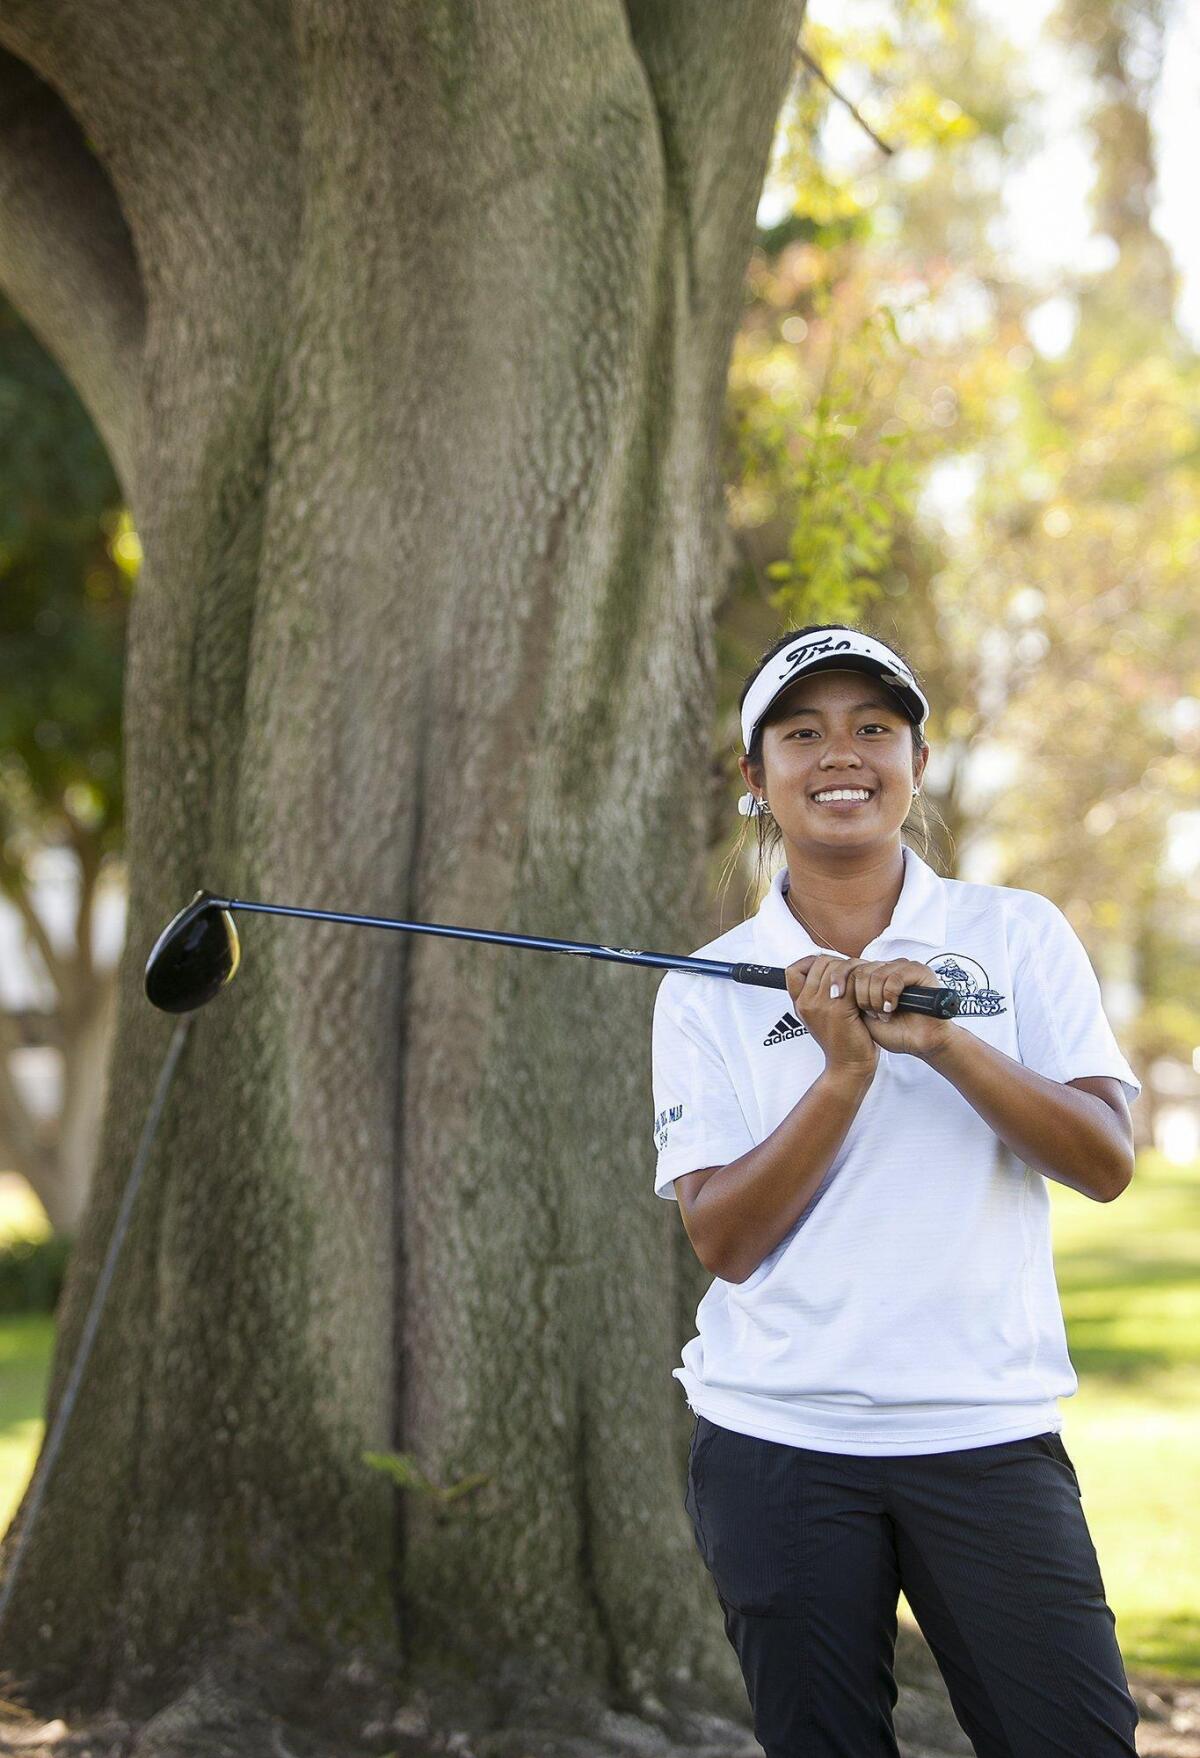 Corona del Mar High senior Alyaa Abdulghany, the 2015 CIF State girls’ golf champion, set a new course and school record with an 8-under score at El Niguel Country Club on Wednesday.